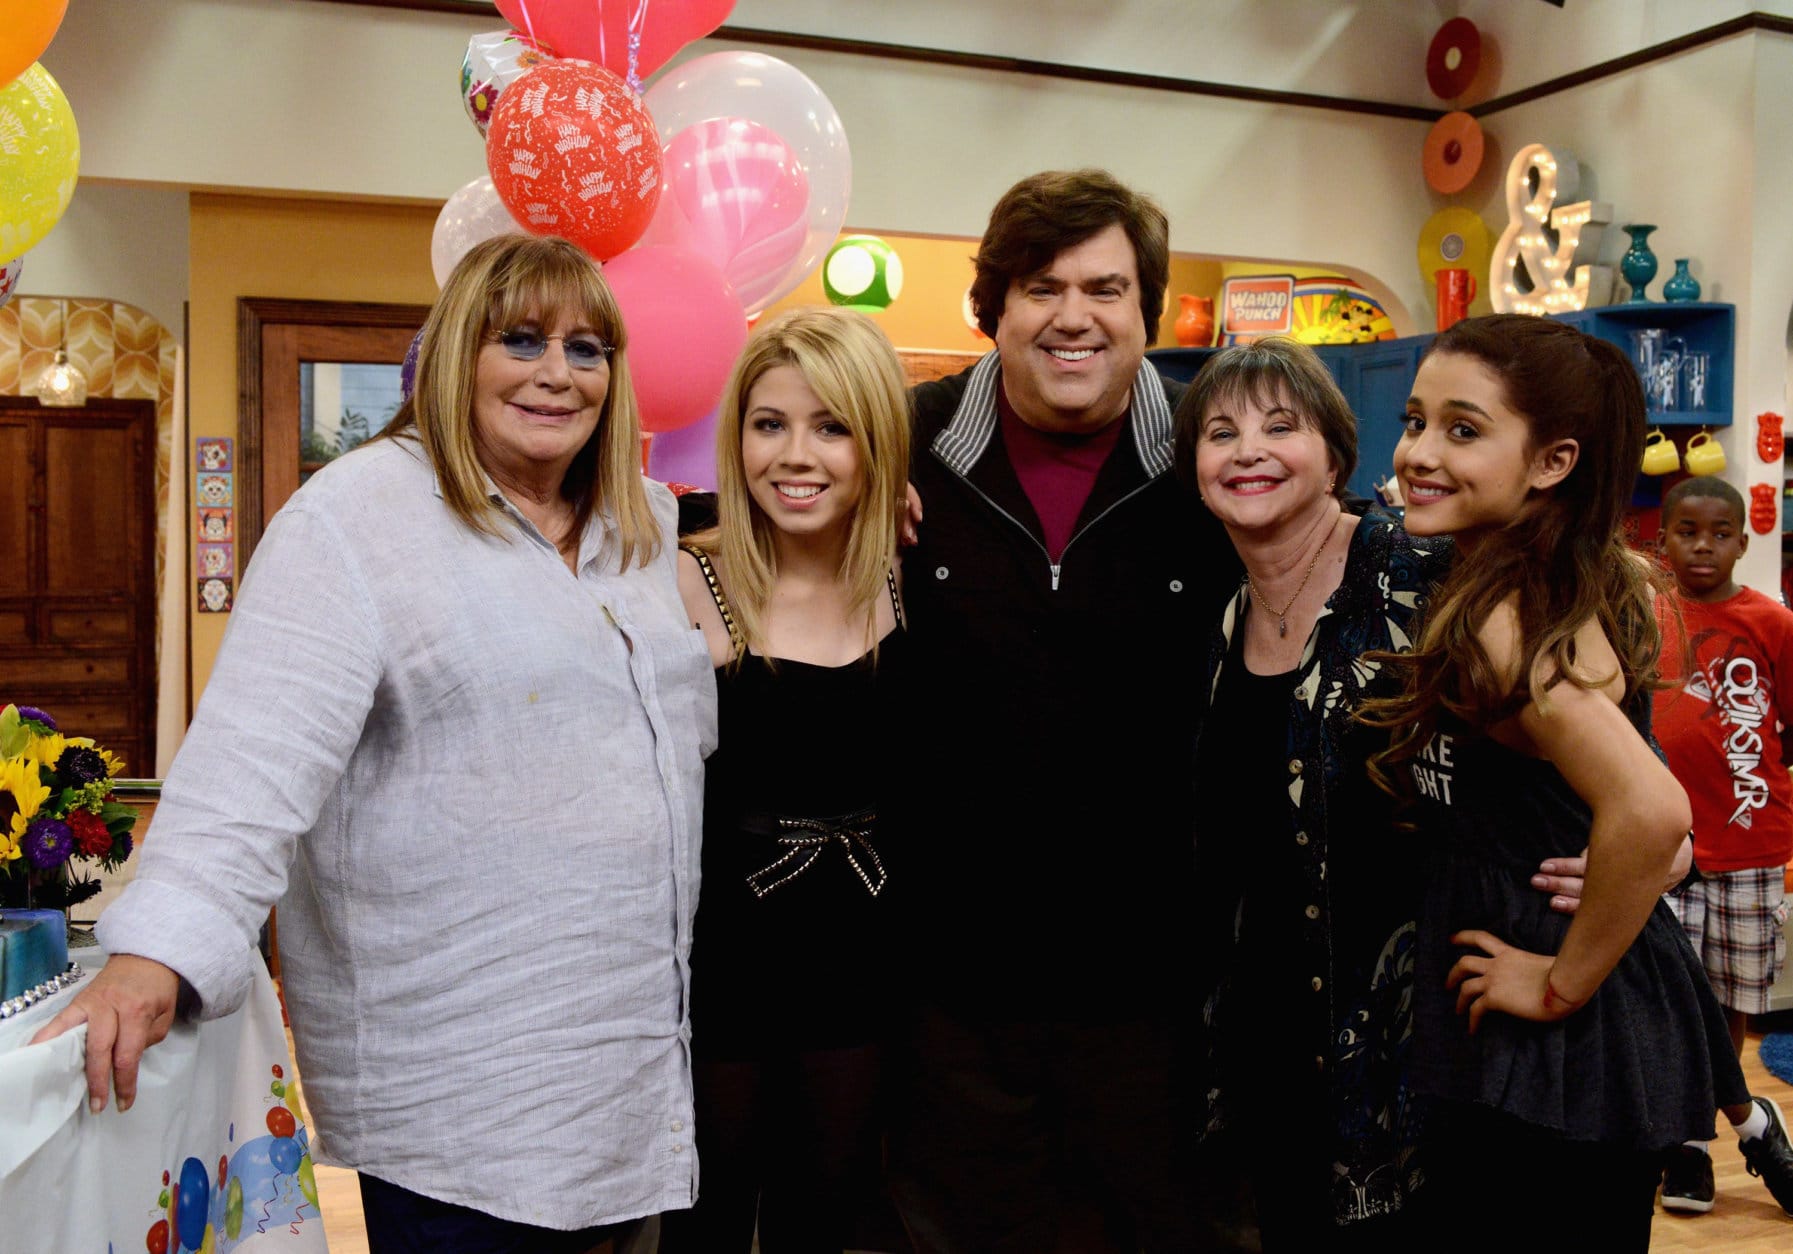 HOLLYWOOD, CA - JUNE 26:  Penny Marshall and Cindy Williams make a guest appearance with creator/executive producer Dan Schneider on Nickelodeon's Sam &amp; Cat, starring Jennette McCurdy and Ariana Grande on June 26, 2013 in Los Angeles, California.  (Photo by Araya Diaz/Getty Images for Nickelodeon)